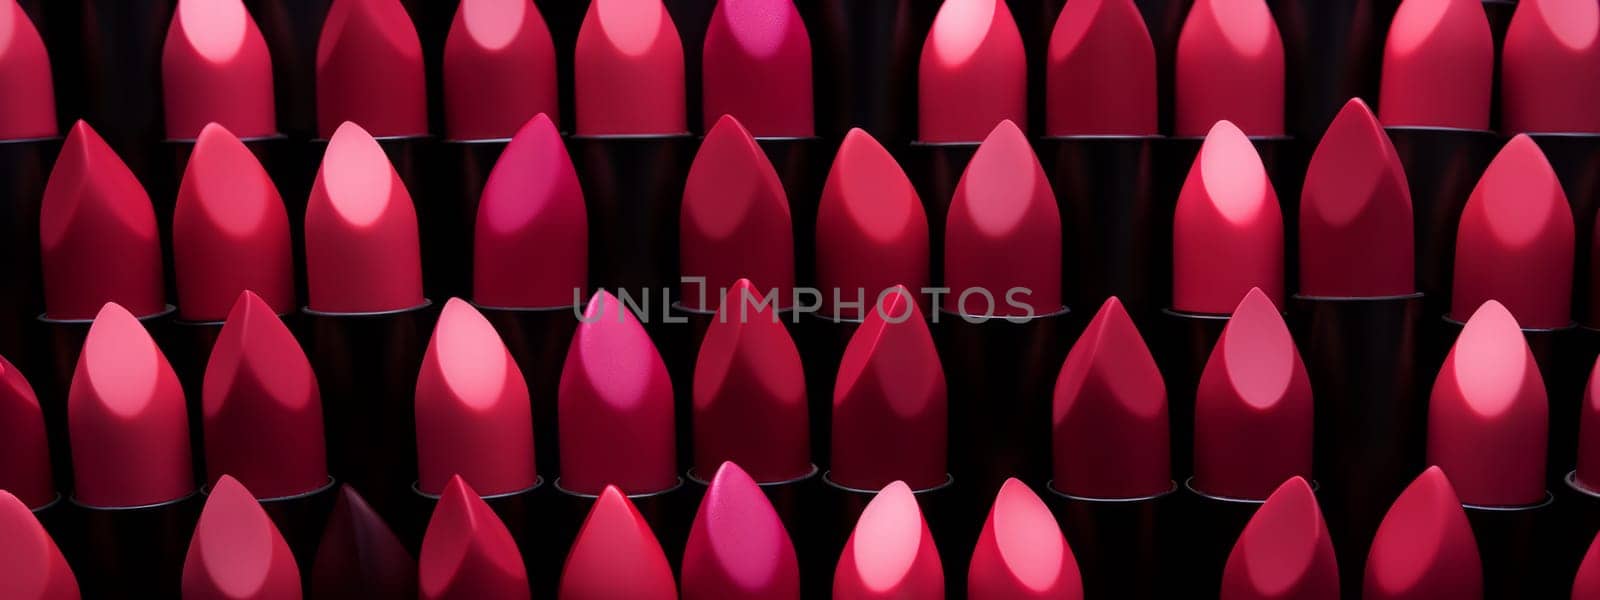 Creative red lipstick pattern background. Minimal Fashion, makeup or cosmetic concept